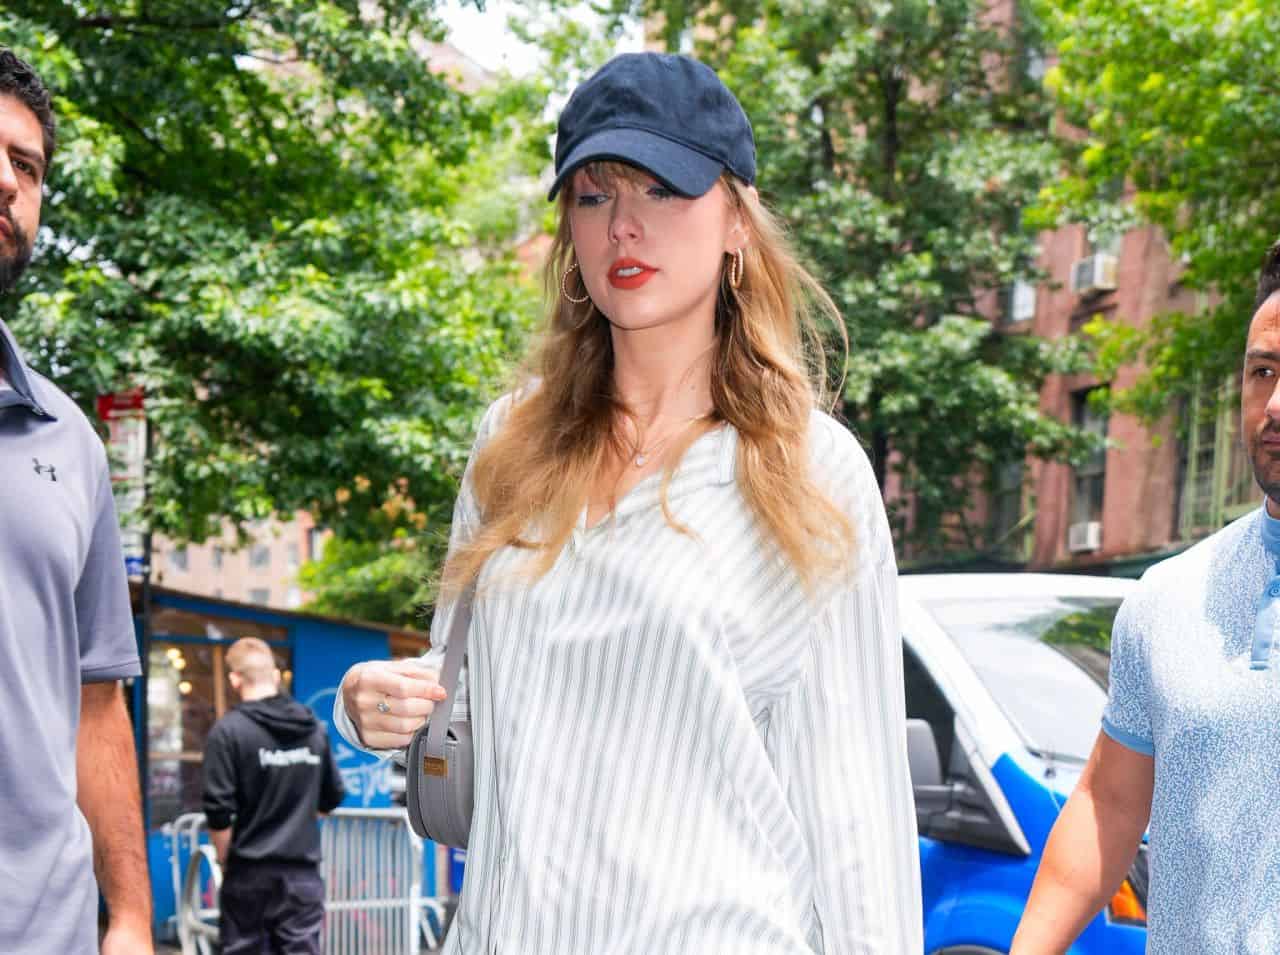 Taylor Swift Brings Summer Style with Striped Shirt and Mini Skirt in NY